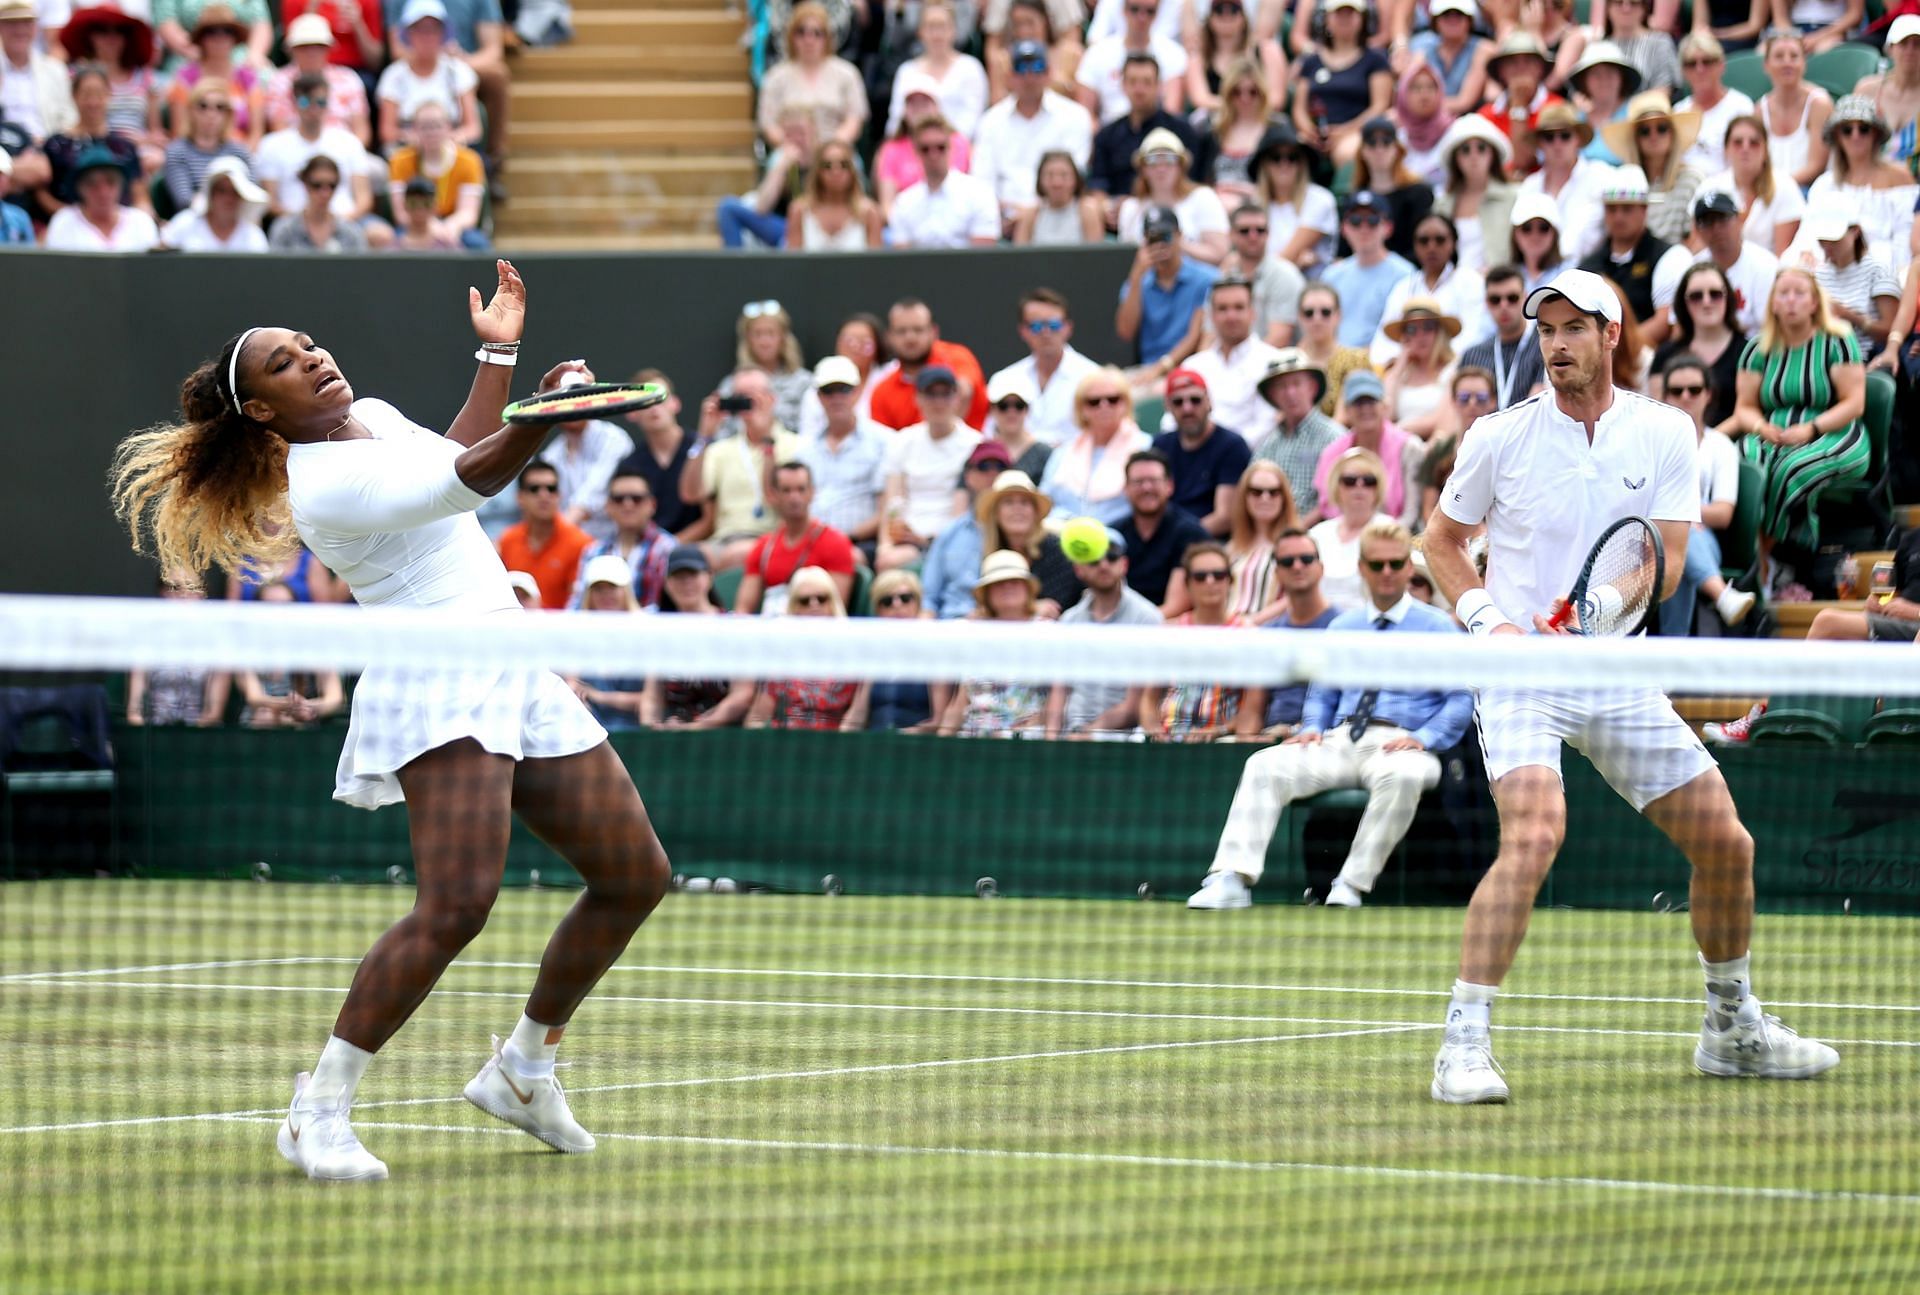 Serena Williams (L) and Andy Murray (L) playing mixed doubles at the 2019 Wimbledon Championships